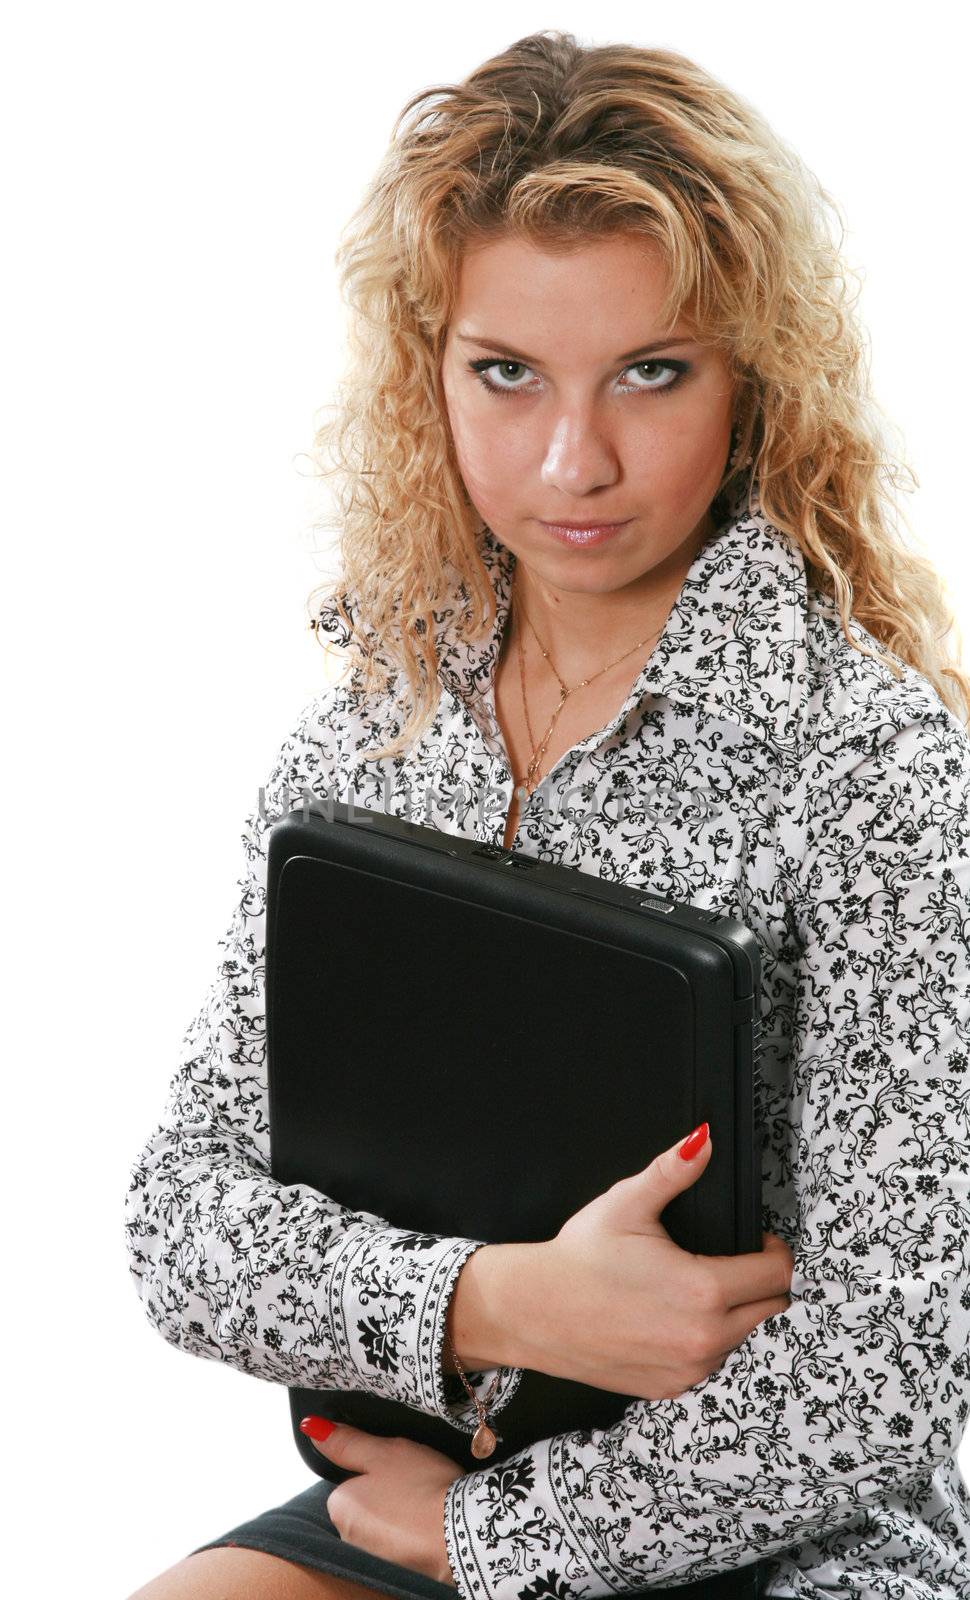 The sexual young woman with laptop on a white background